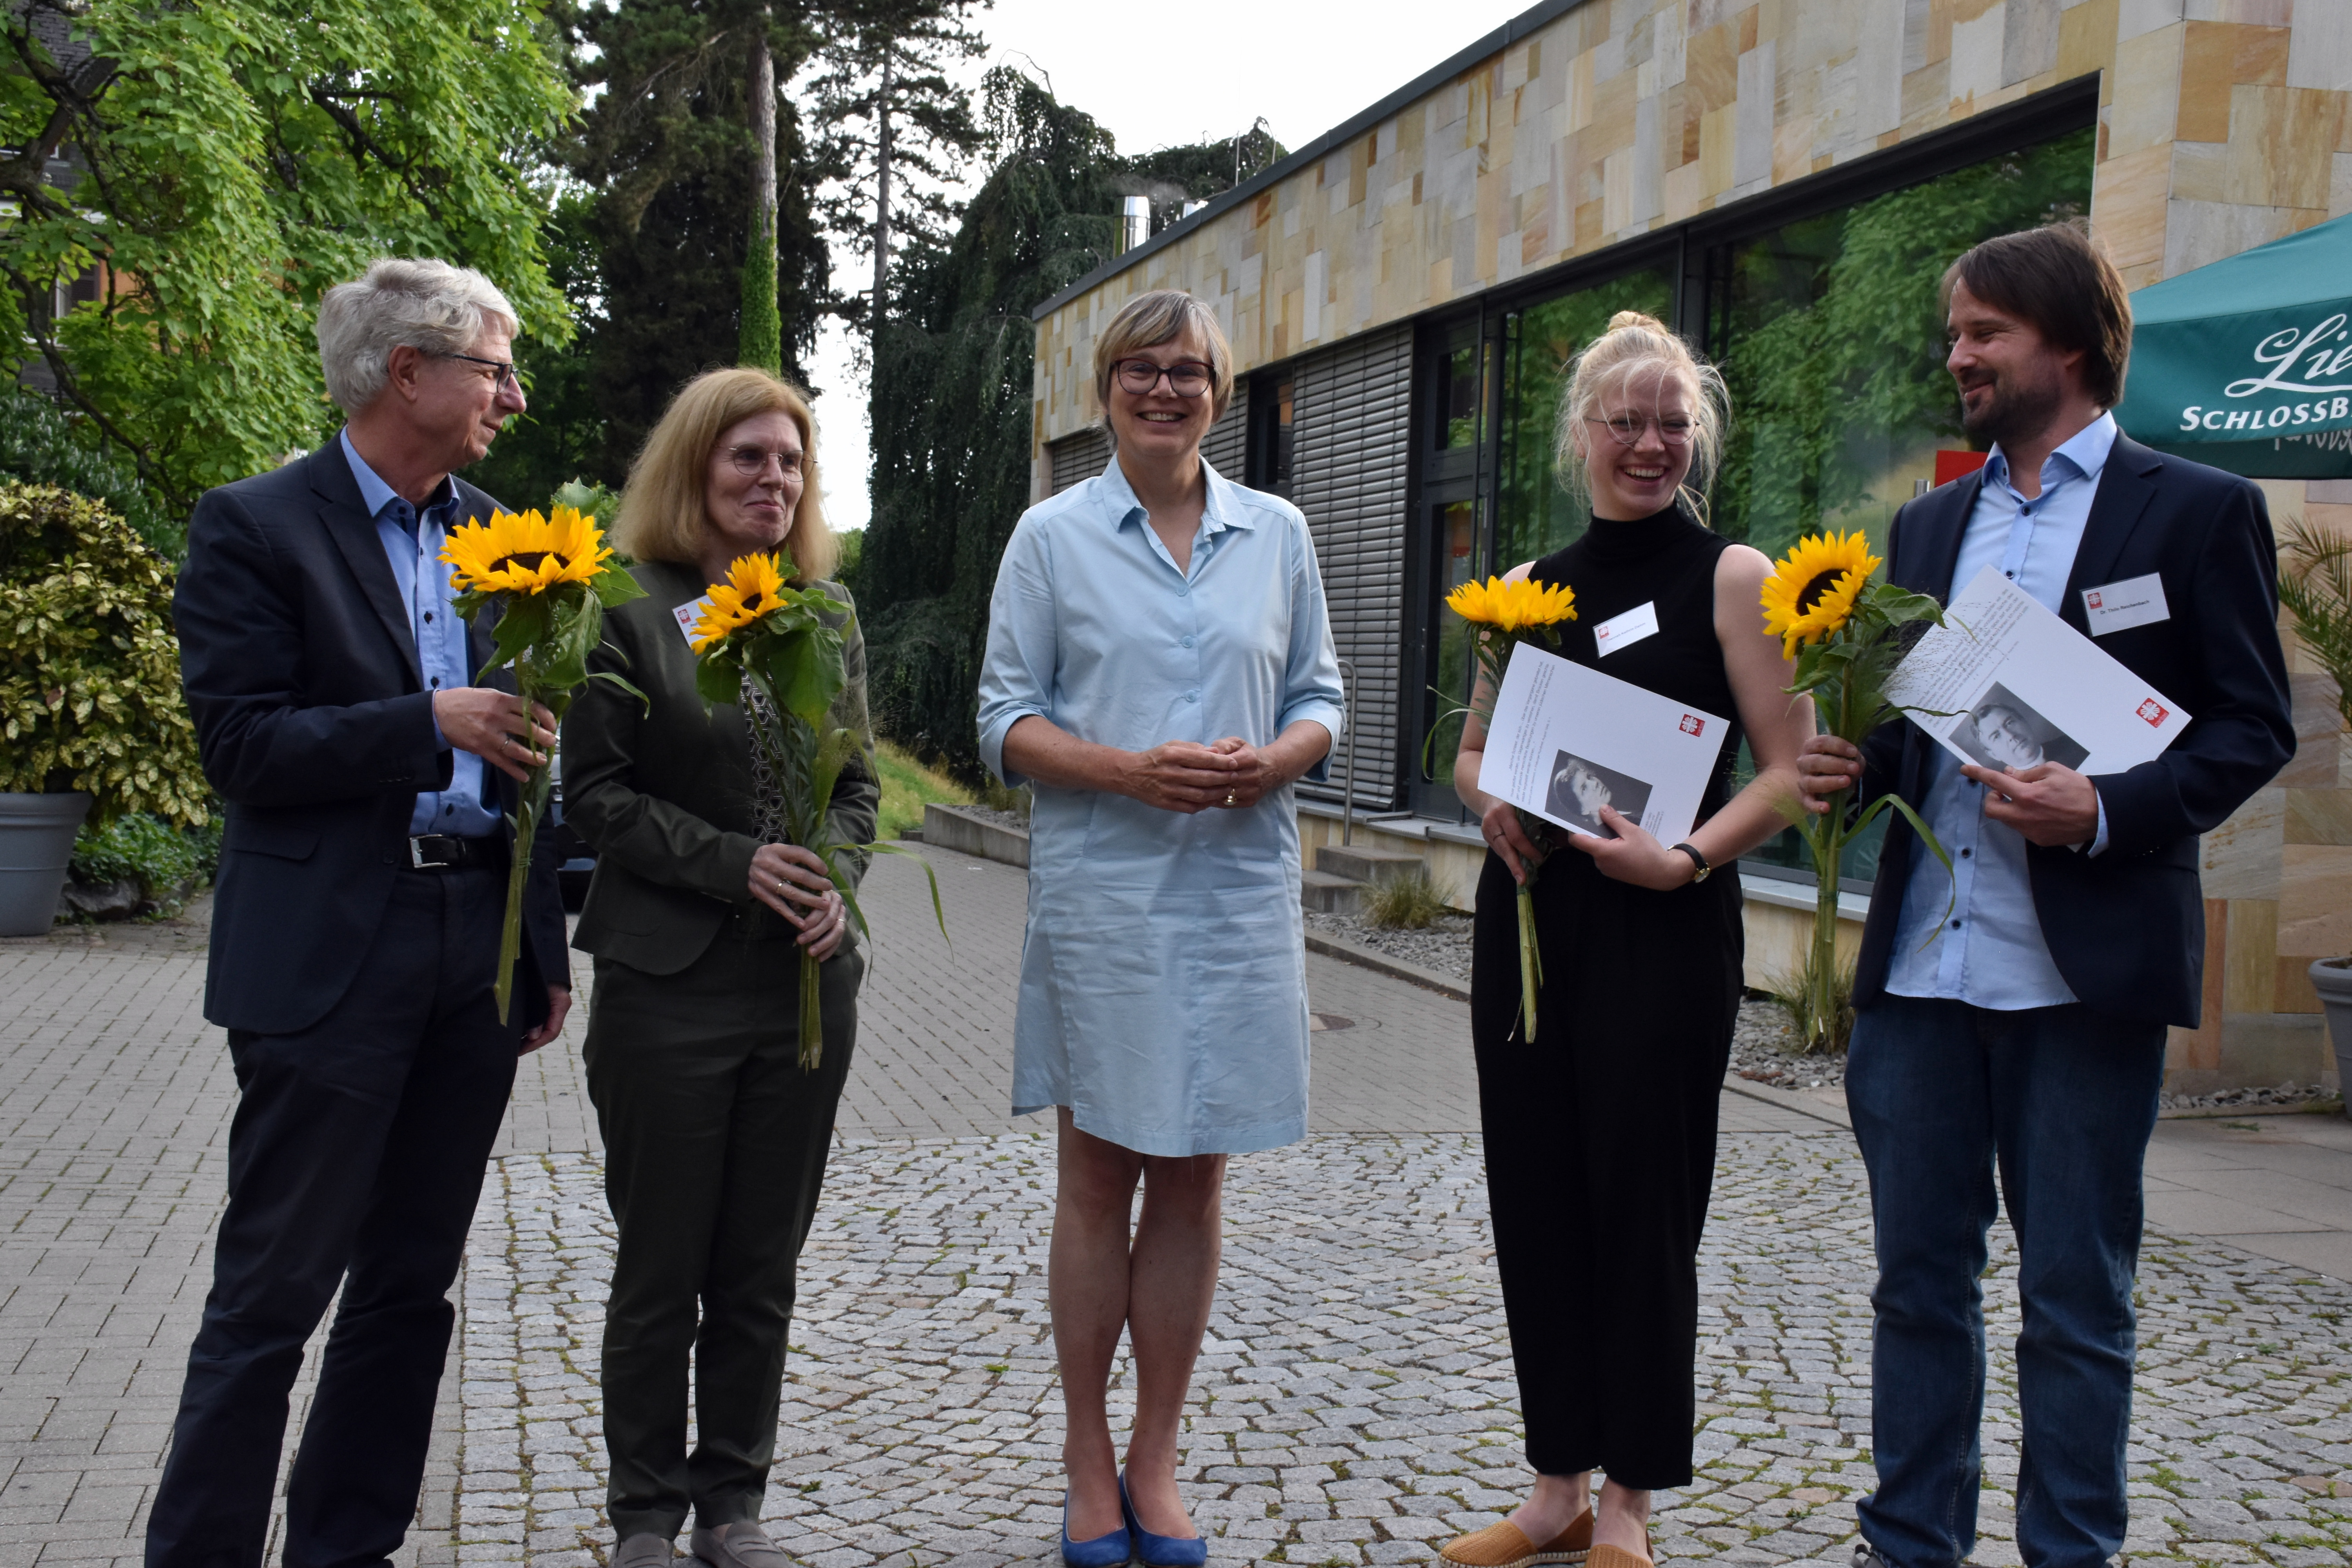 V.l.n.r. Prof. Dr. Andreas Wittrahm, Prof. Dr. Ursula Nothelle-Wildfeuer, Eva Maria Welskop-Deffaa, Hannah Damm, Dr. Thilo Reichenbach